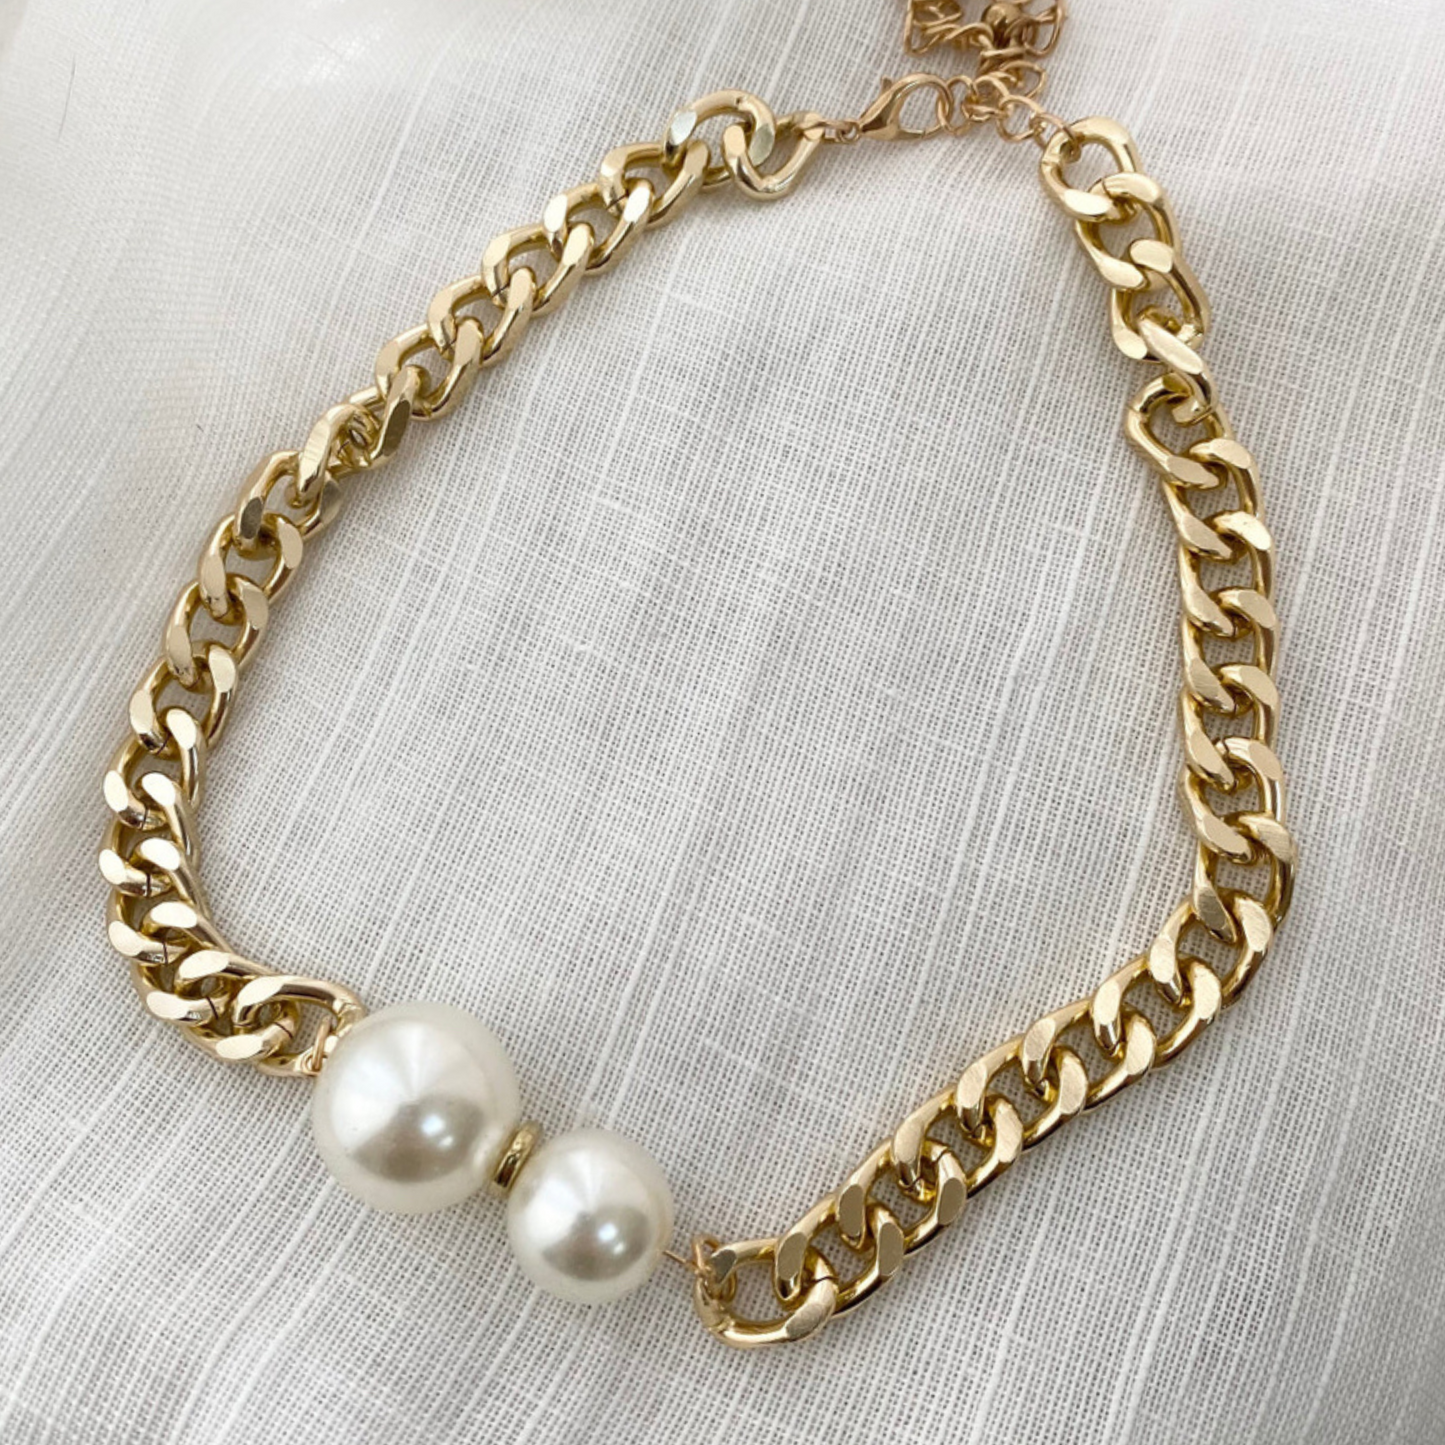 Gold and Pearl Chunky Choker Necklace